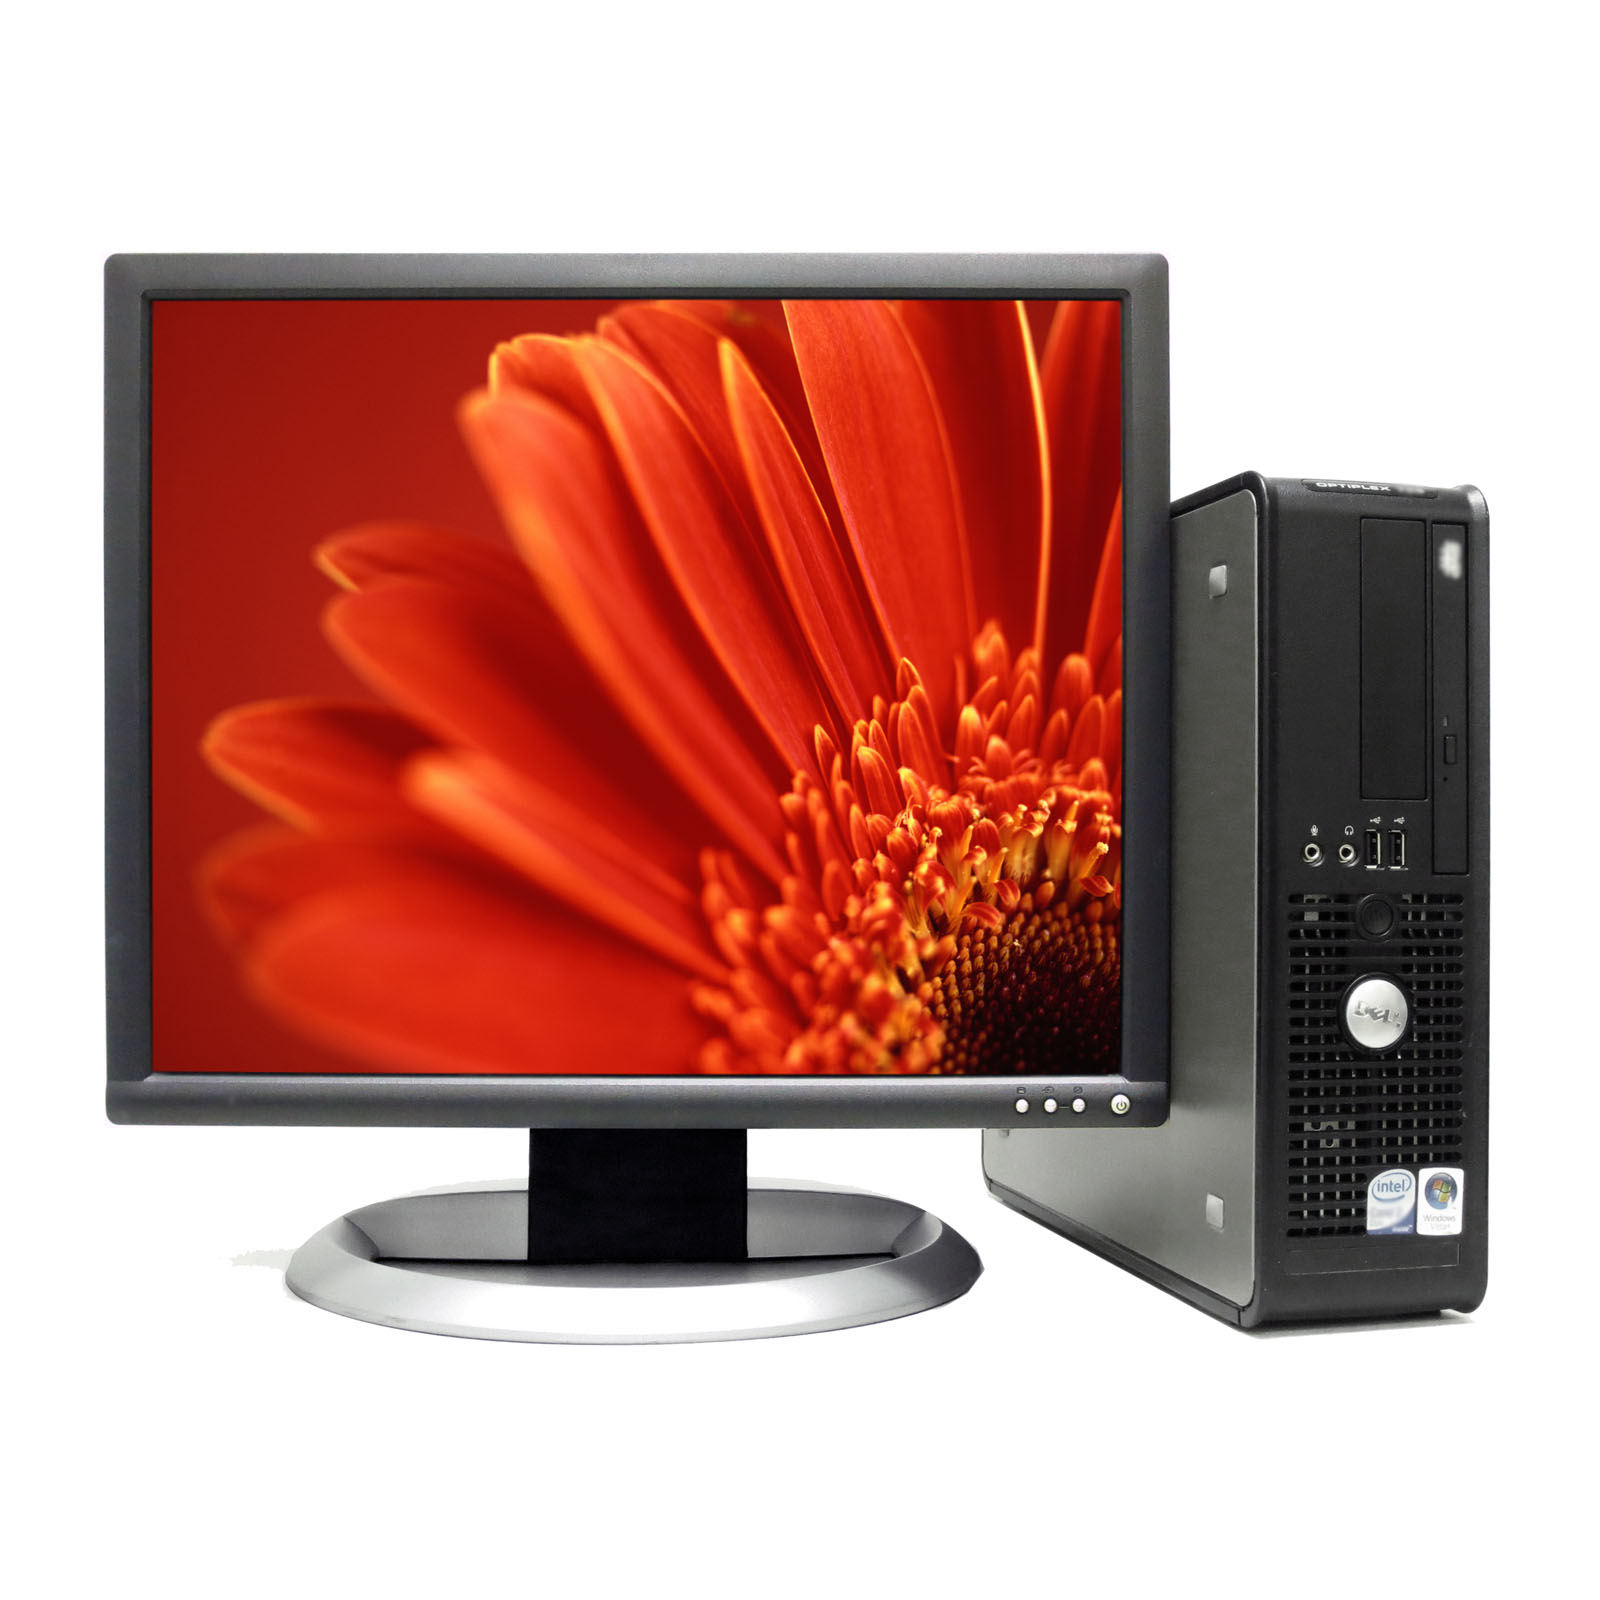 Dell Optiplex 755 PC With 17" LCD Monitor Package. Core 2 Duo 2.4 Ghz, 4 GB RAM, 250 GB HDD And DVD   1 Year Warranty.